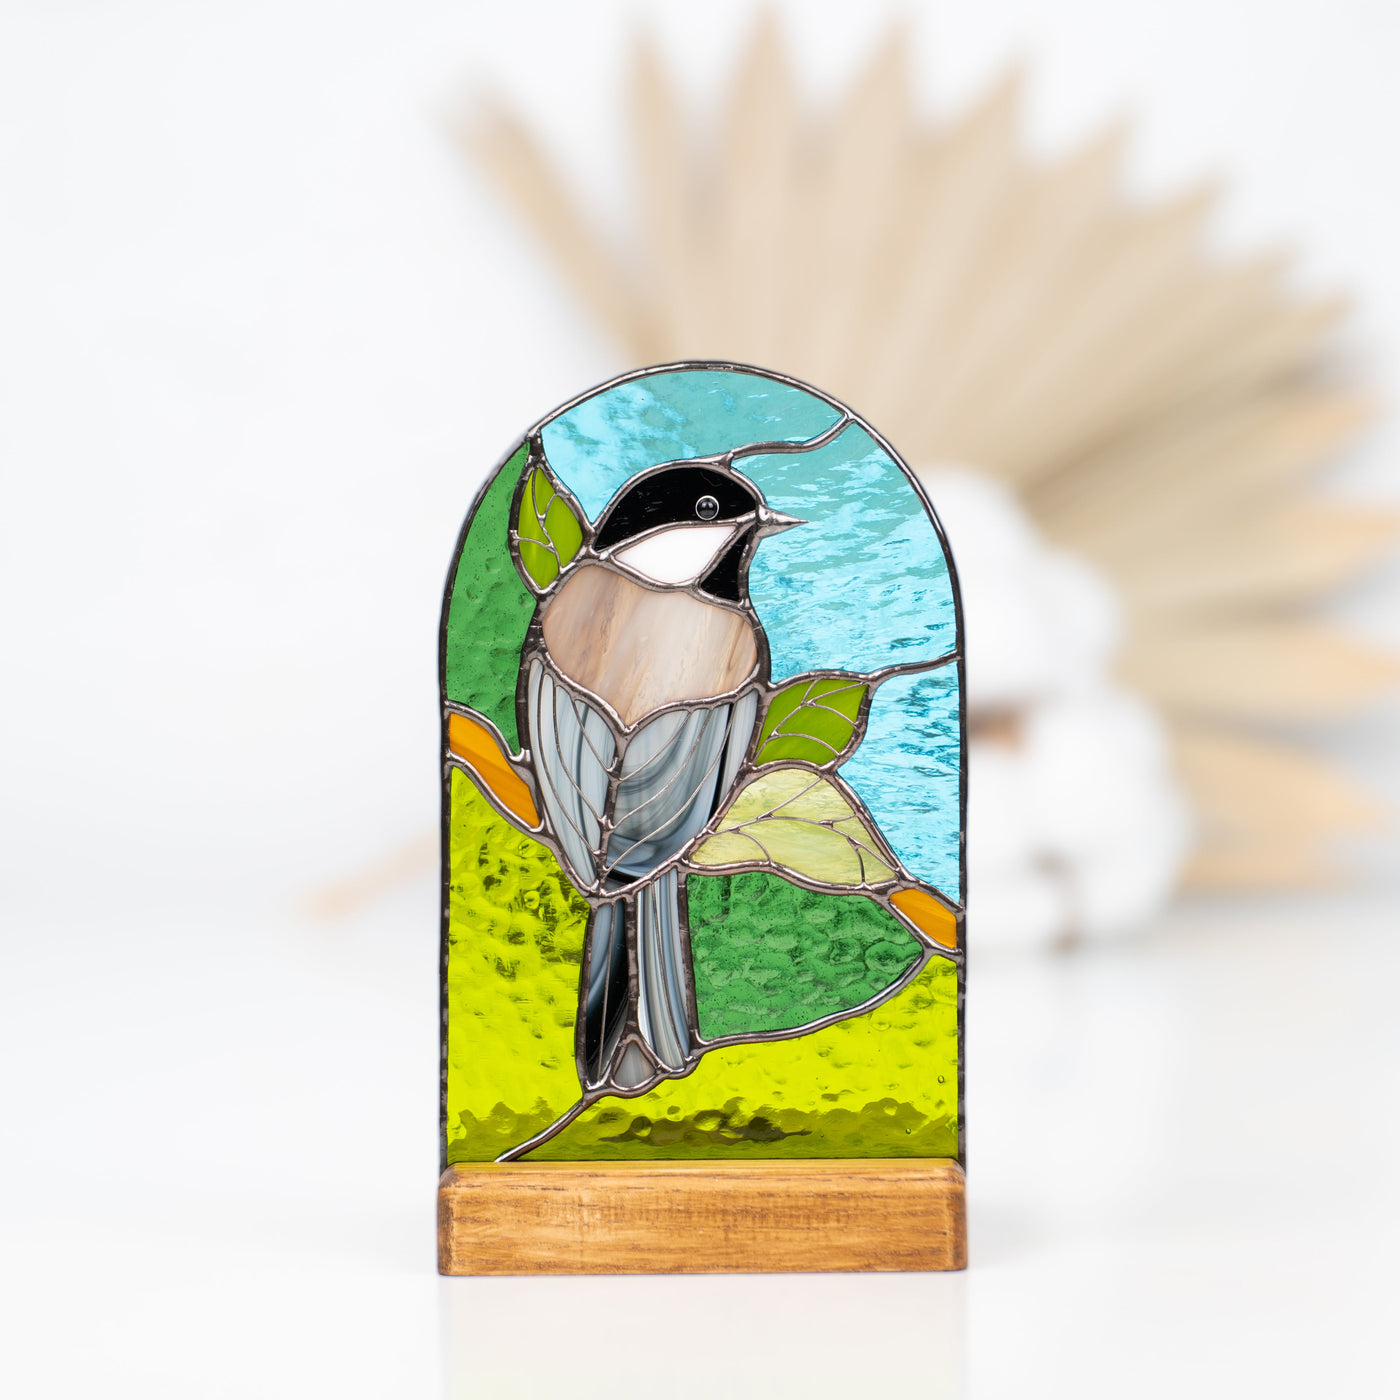 Panel in a wooden base depicting a chickadee on the nature background of stained glass